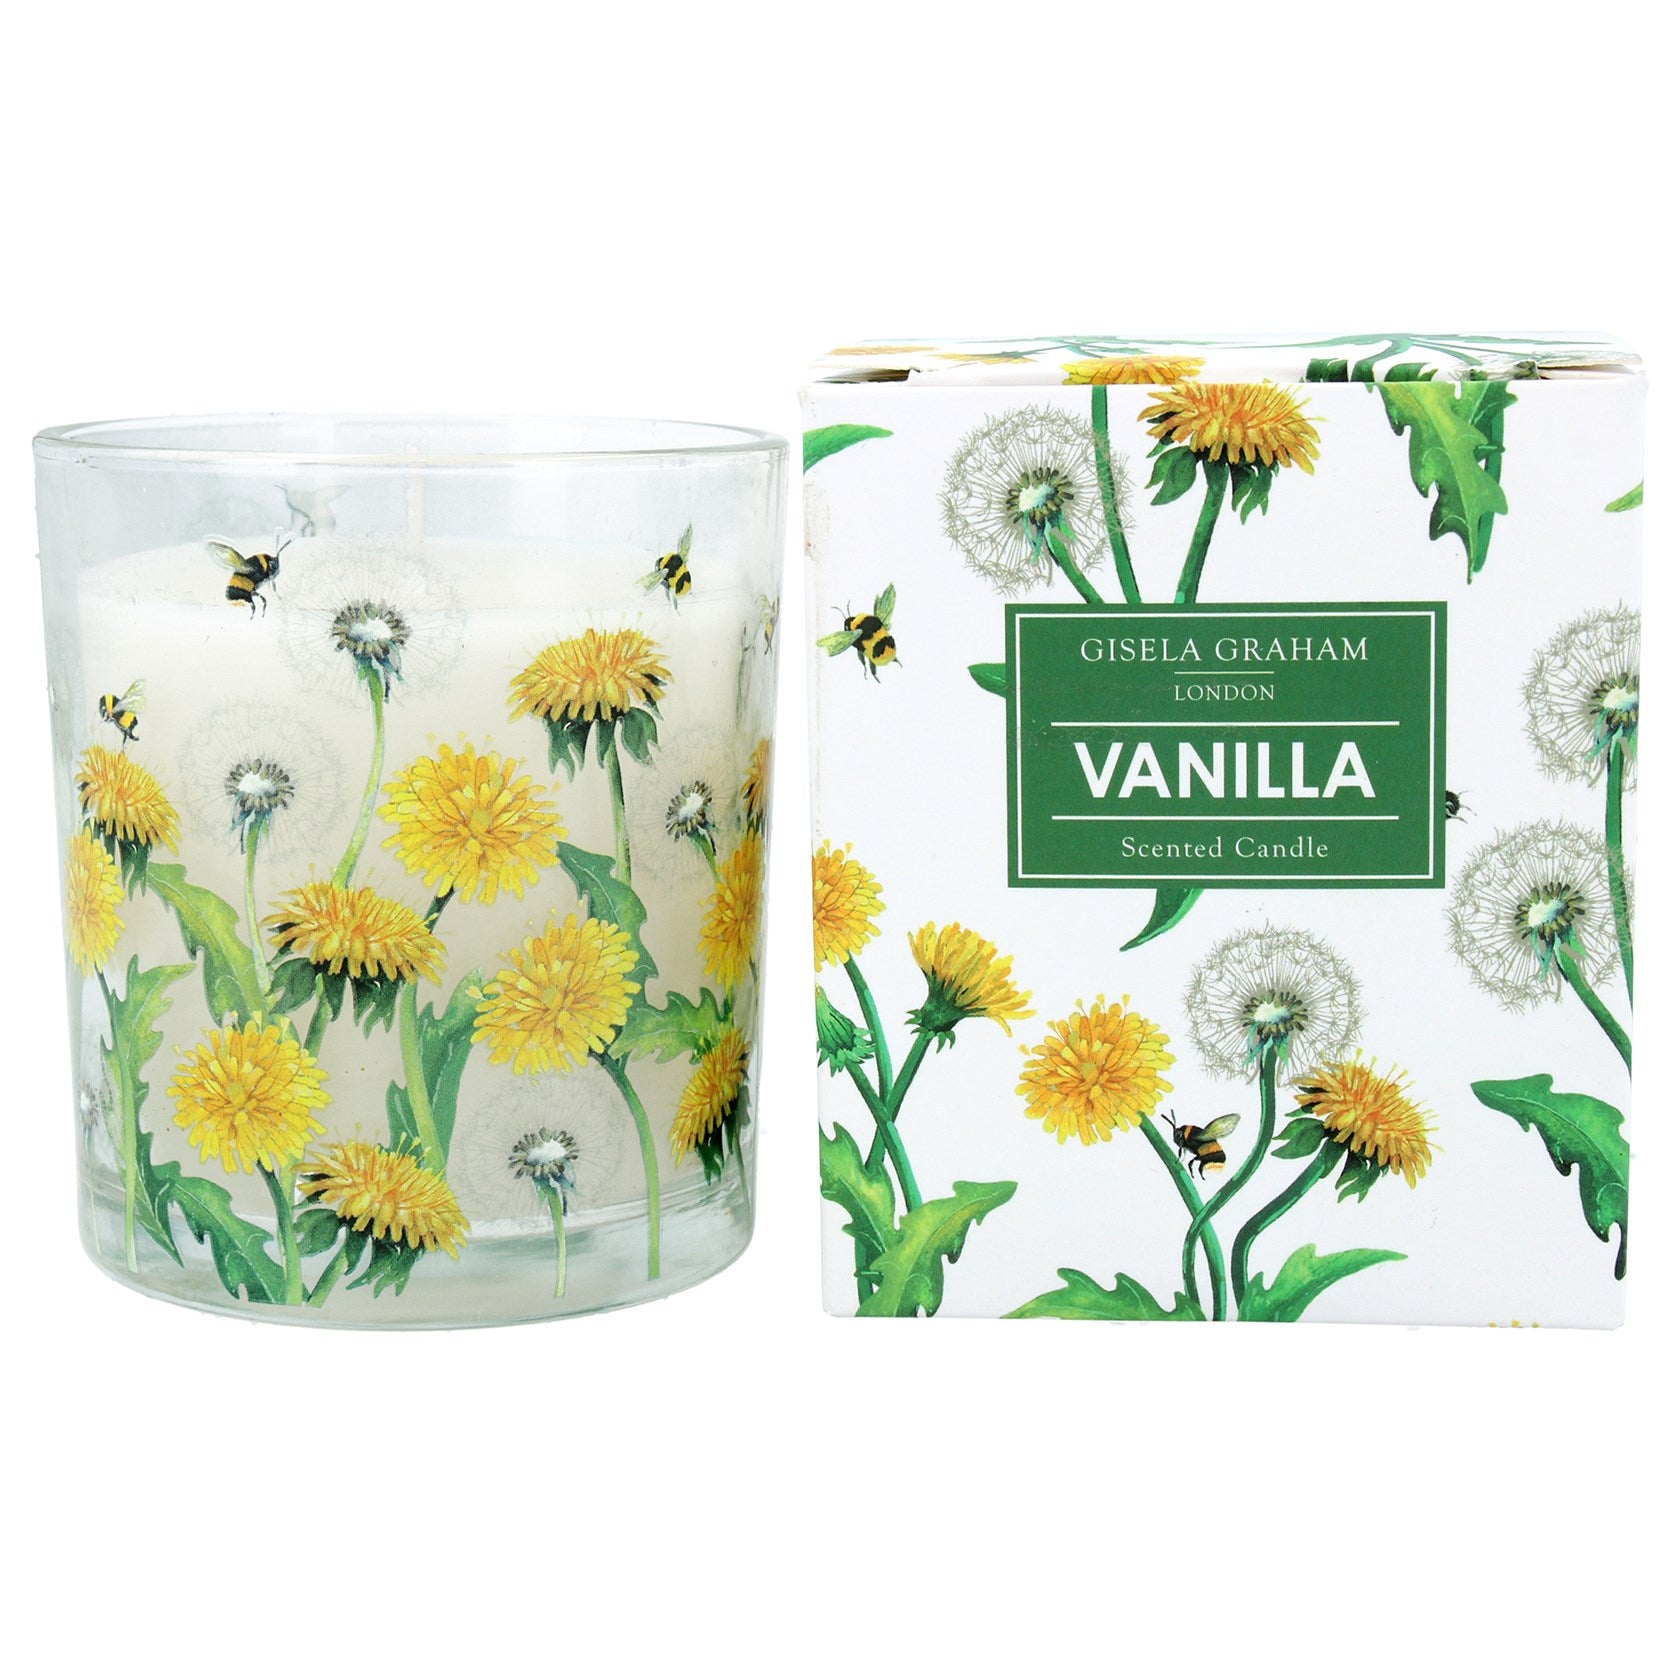 Vanilla Scented Dandelion & Bee Boxed Candle - Large